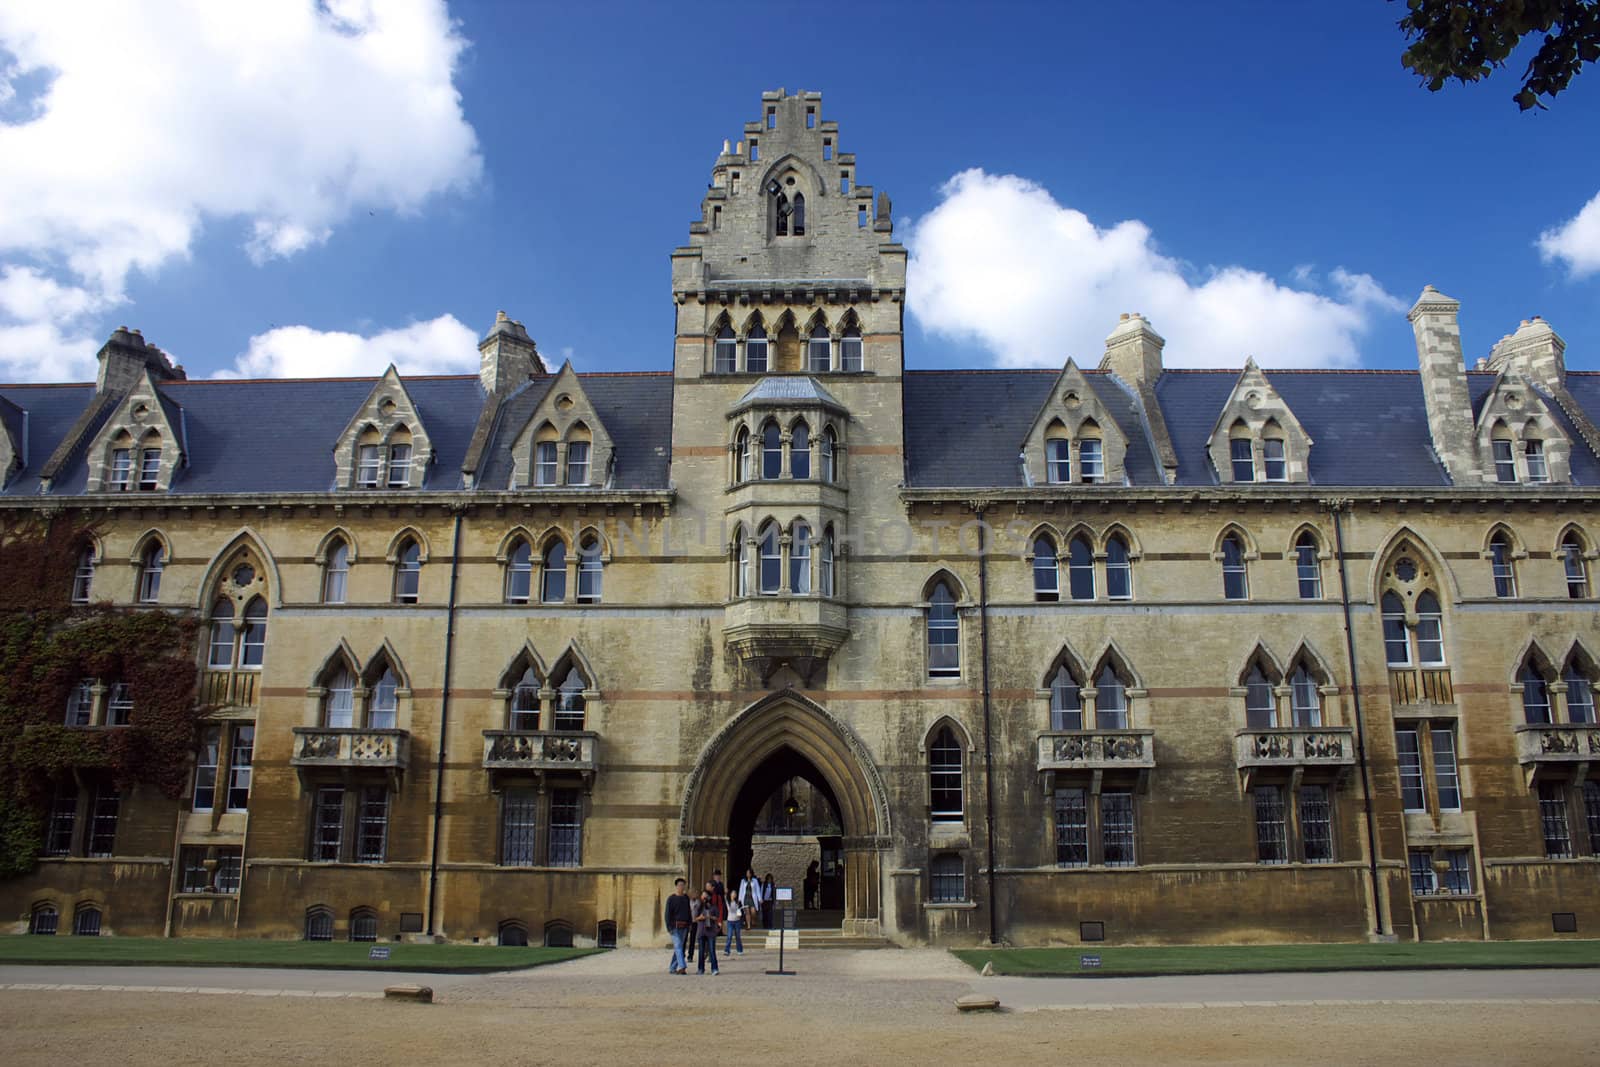 Entrance of Christ Church, Oxford, UK. Christ Church is one of the colleges of Oxford Univeristy and at the same time the Cathedral church of the diocese of Oxford.